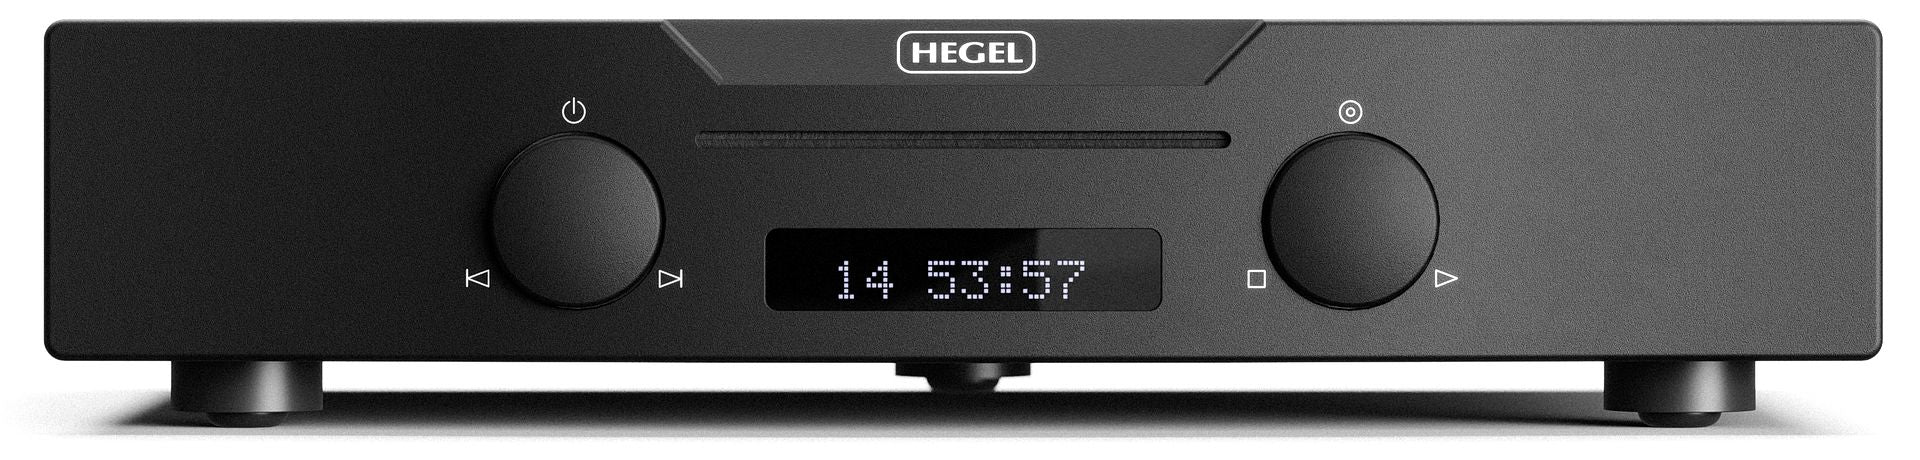 Hegel Music Systems Viking Reference Bit-Perfect CD Player - Safe and Sound HQ